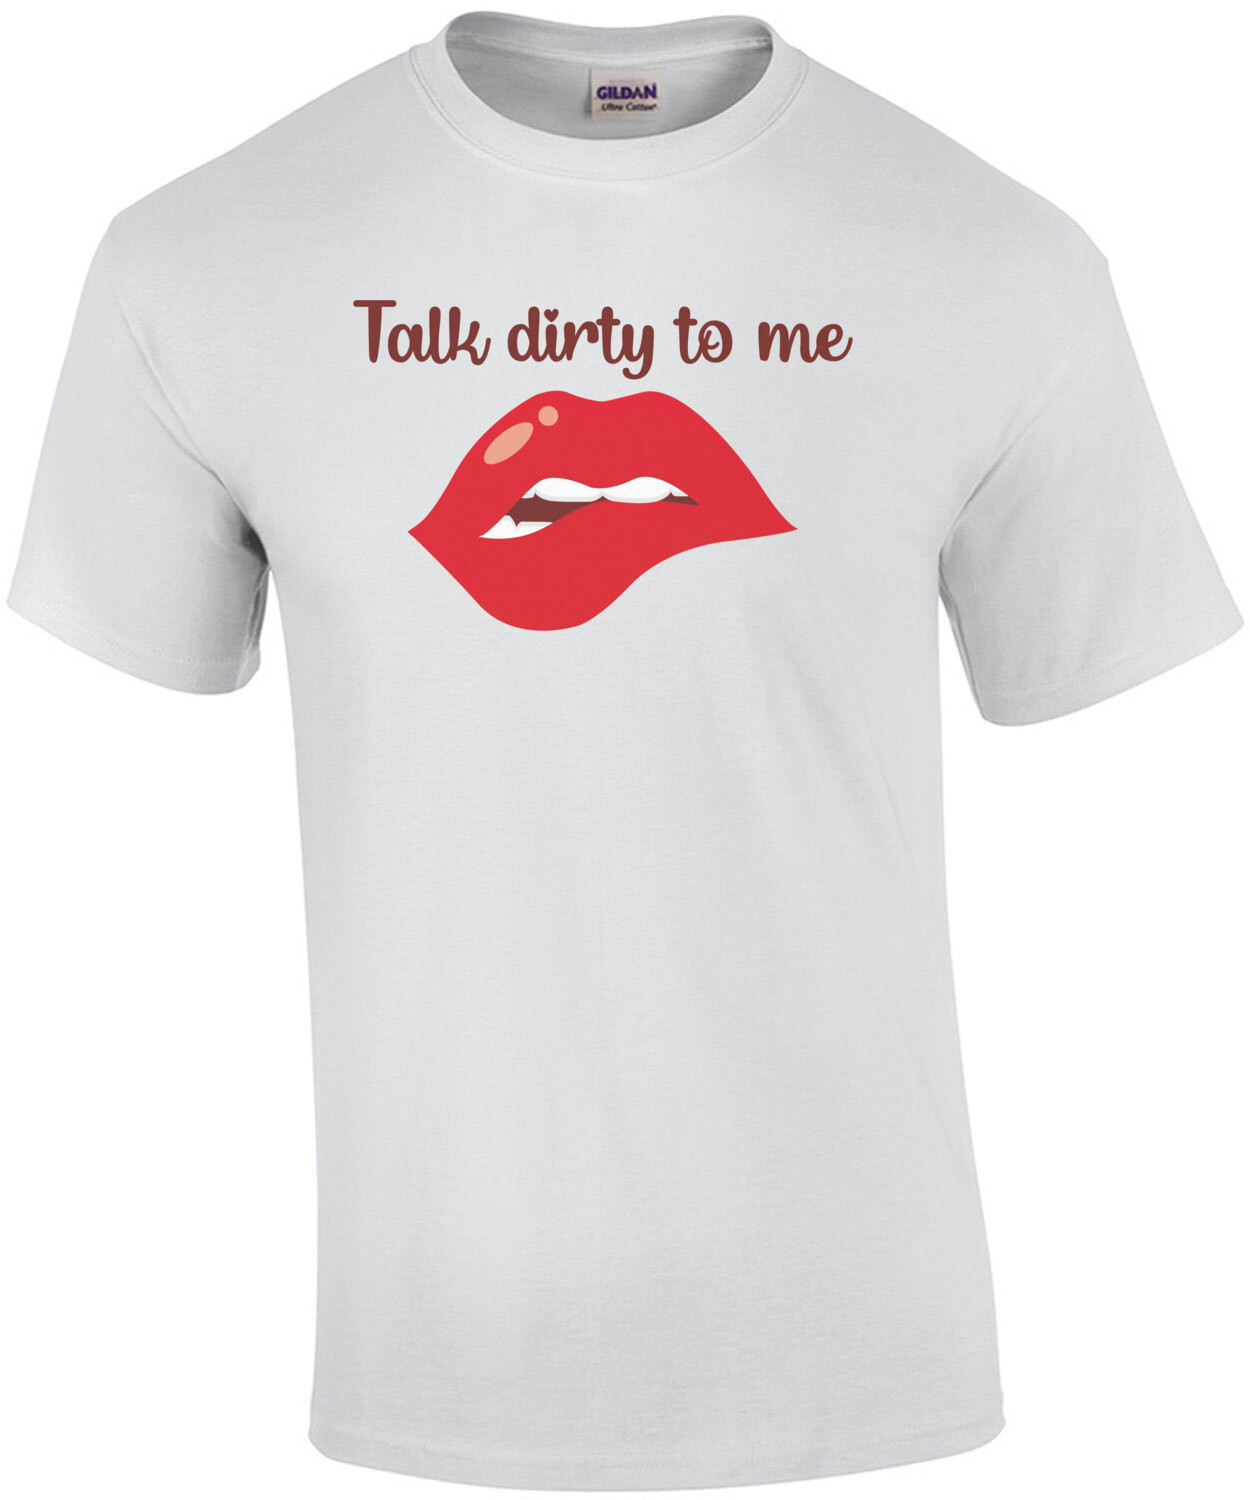 Talk dirty to me - cute funny ladies t-shirt